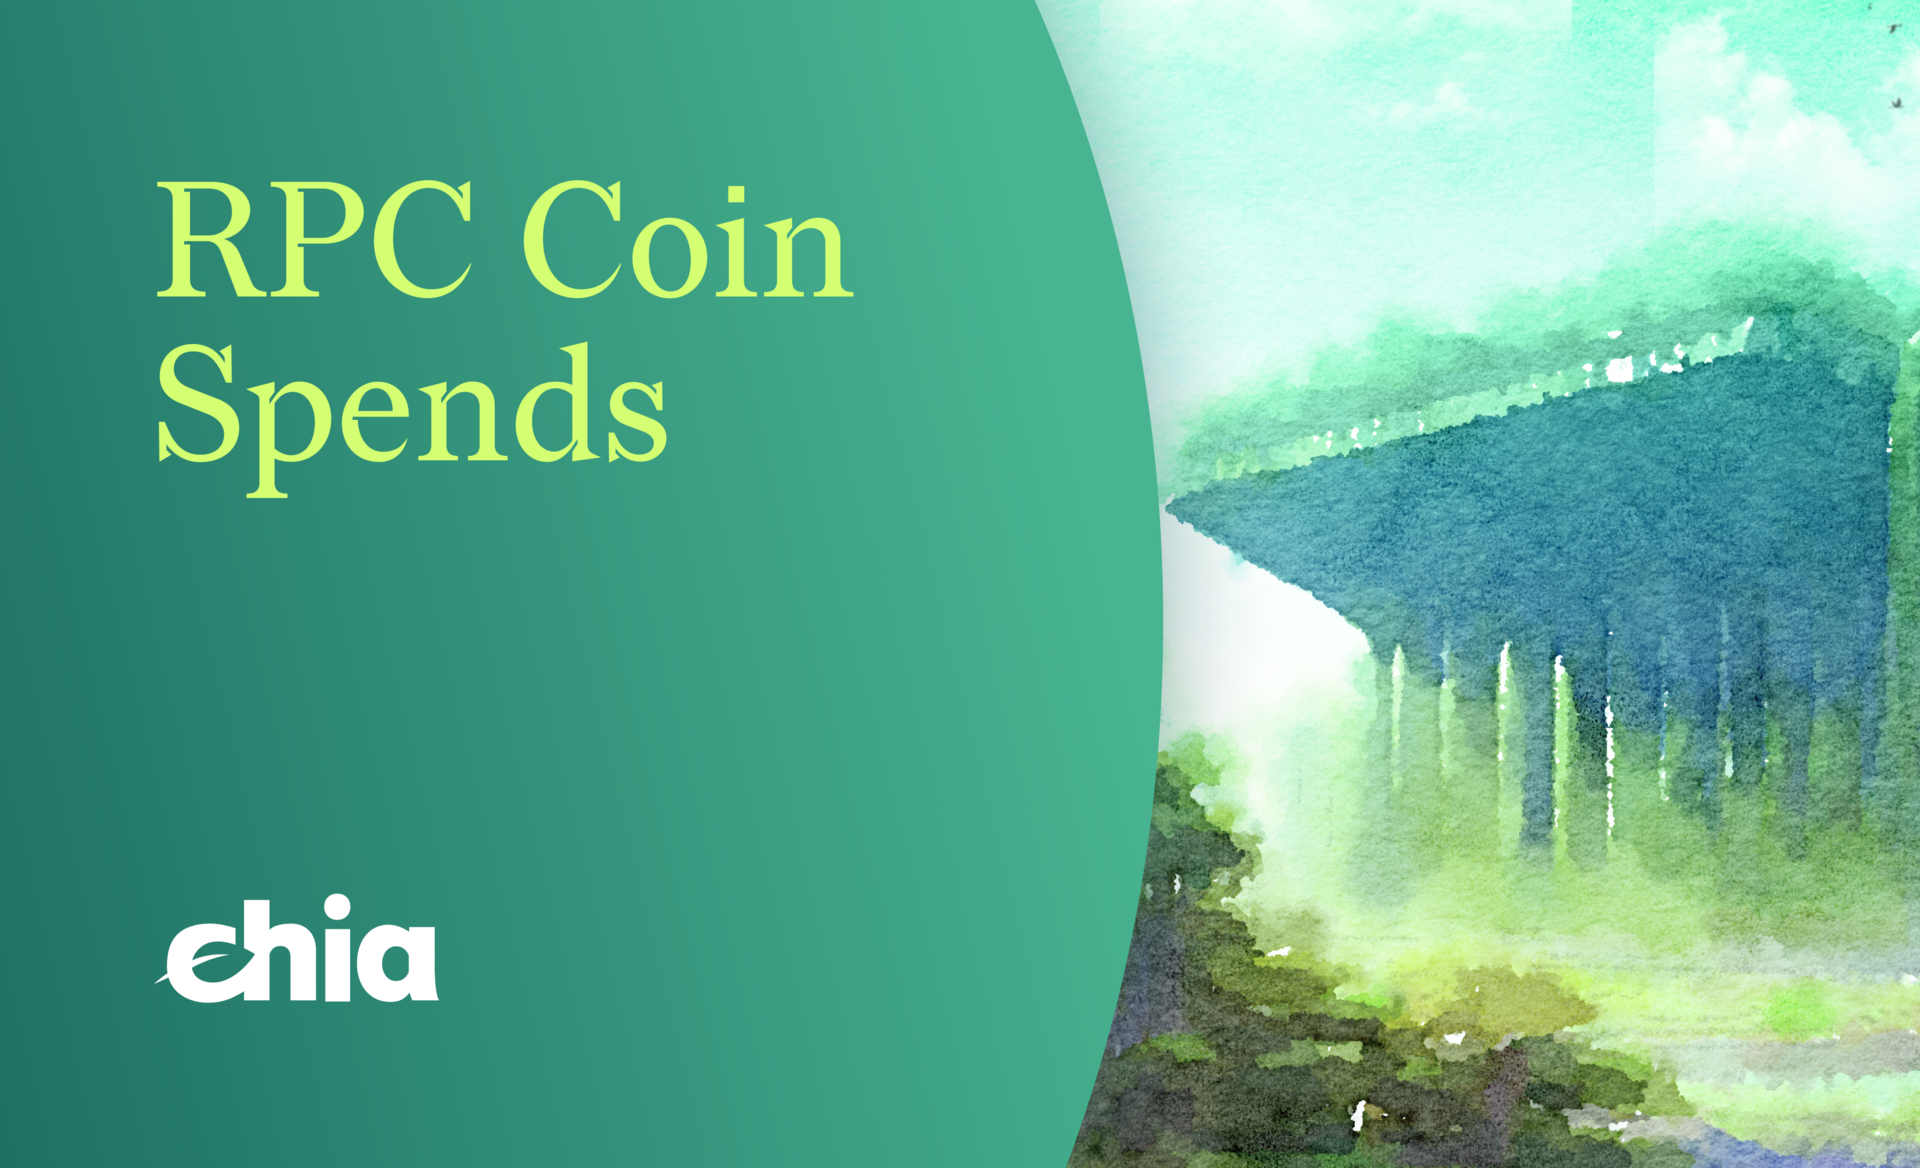 RPC Coin Spend